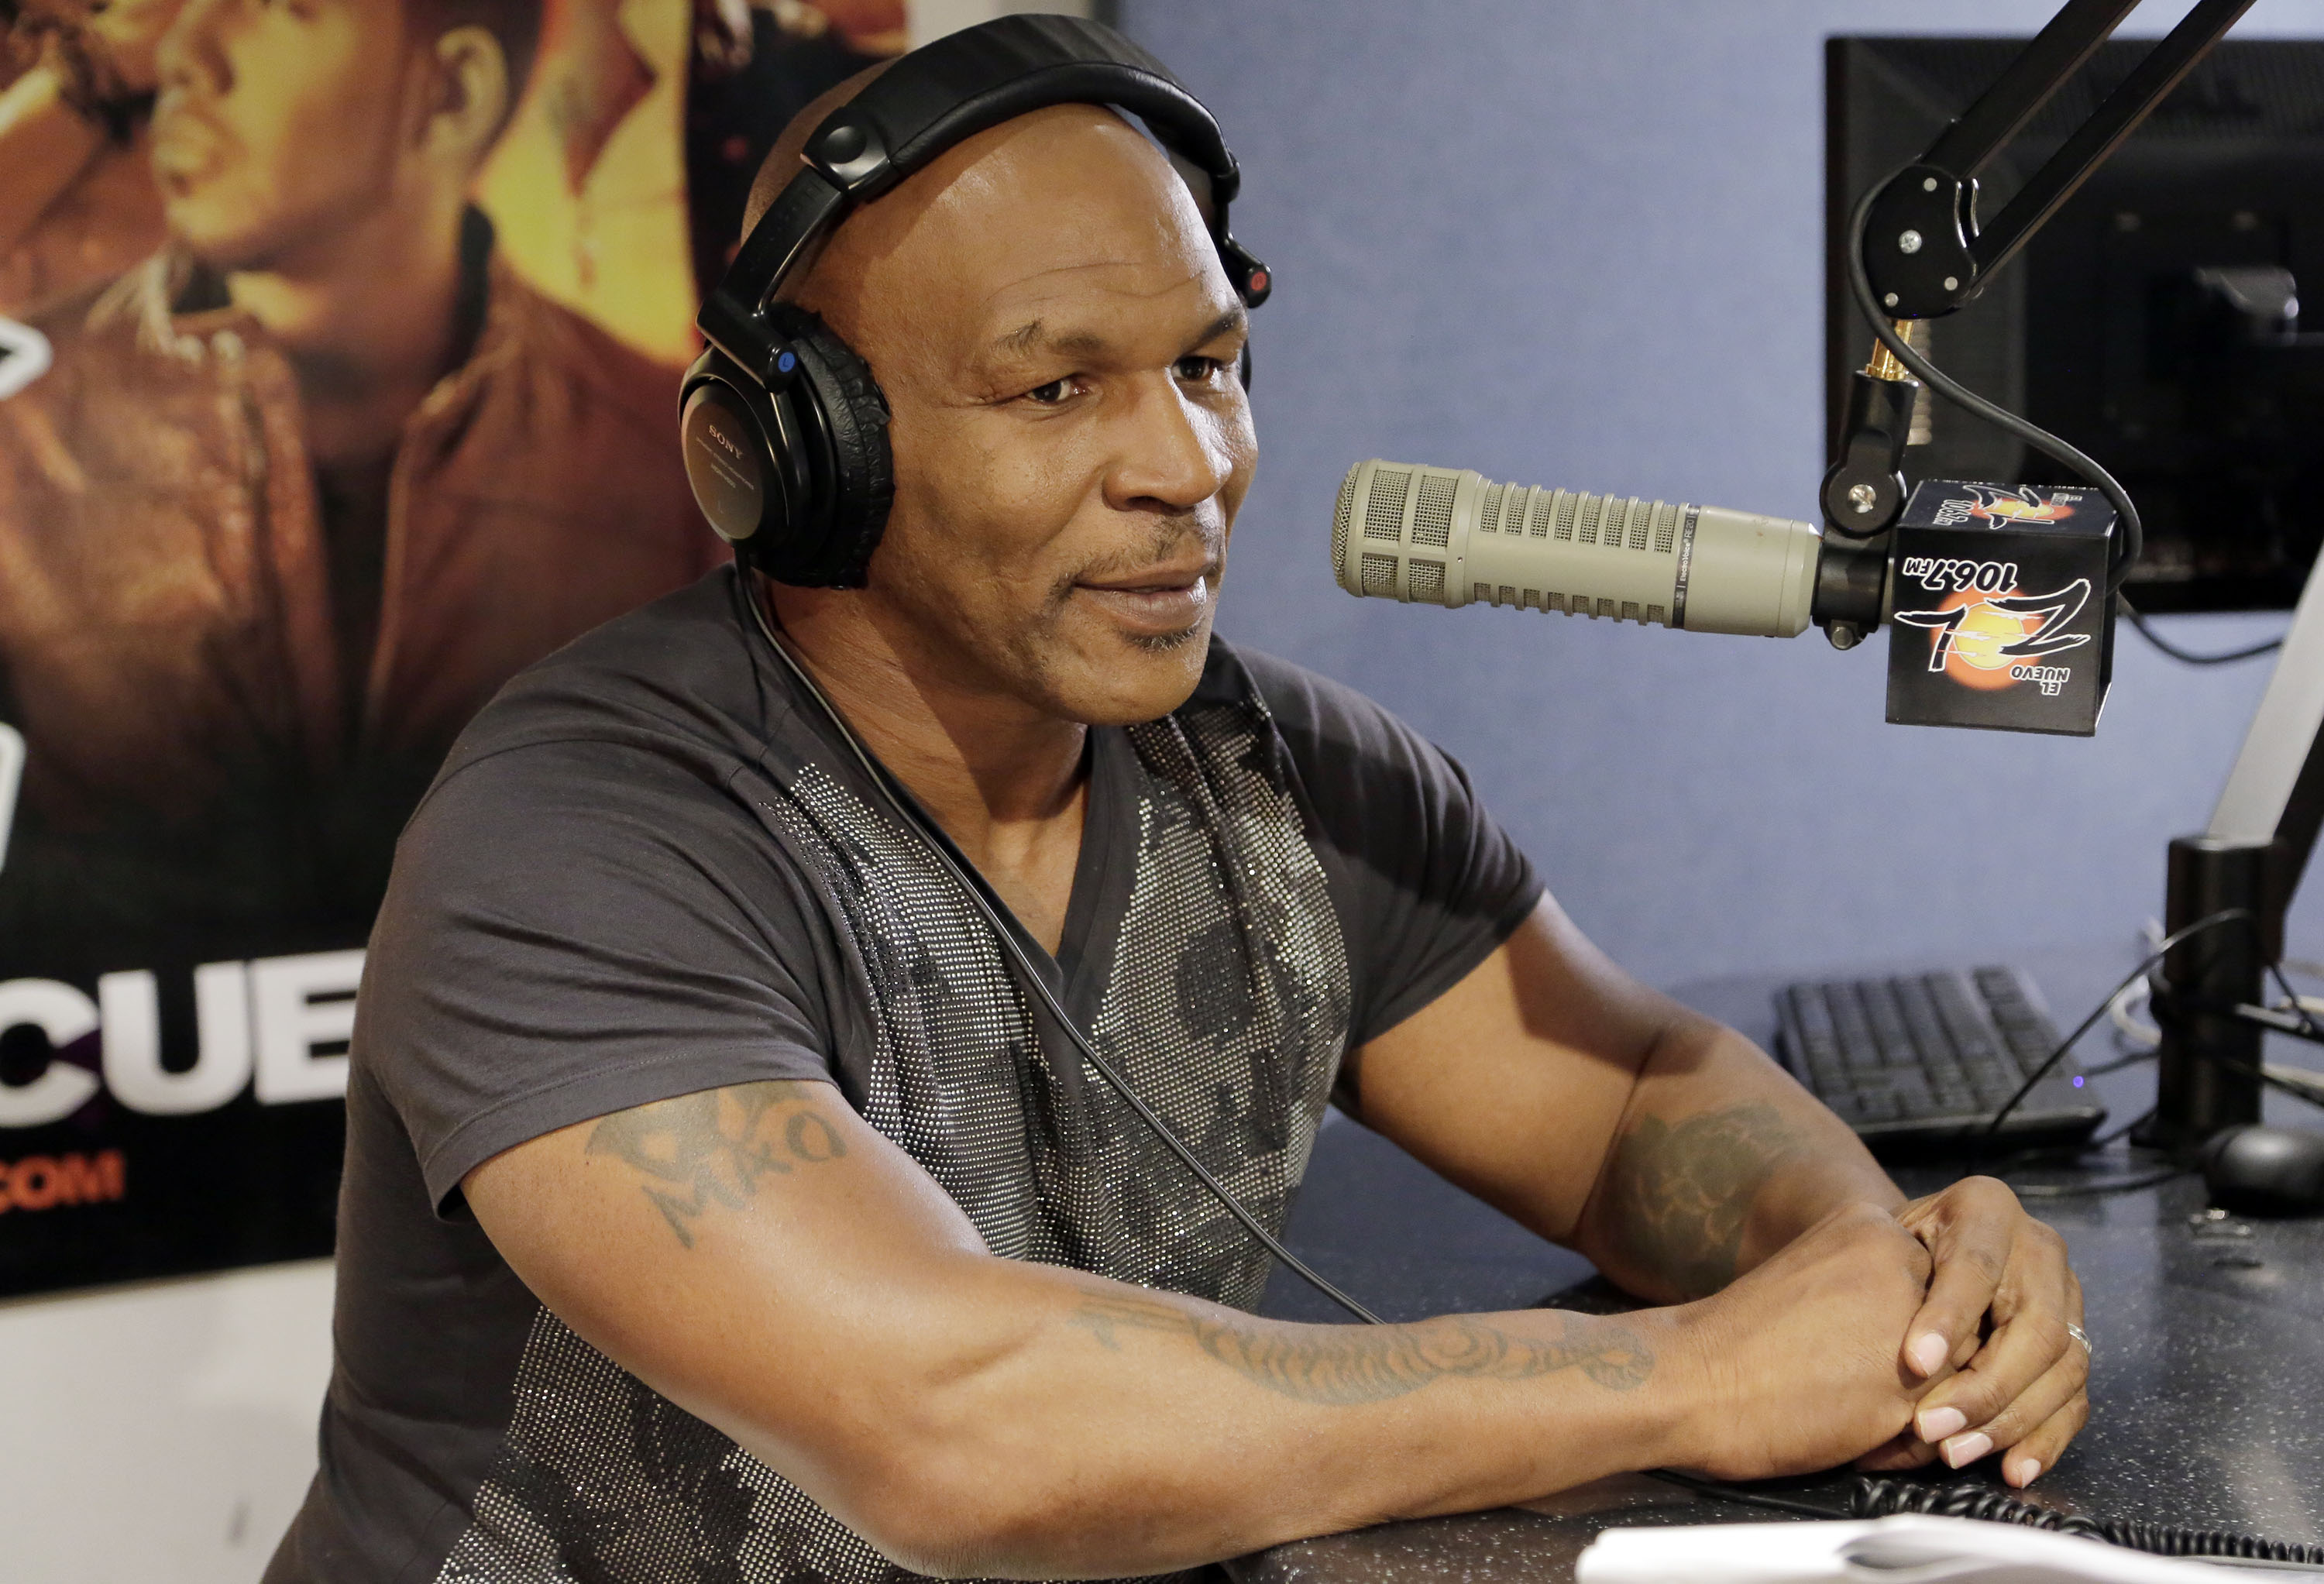 Mike Tyson said he wanted to be mad at his father, but wasn't angry at him